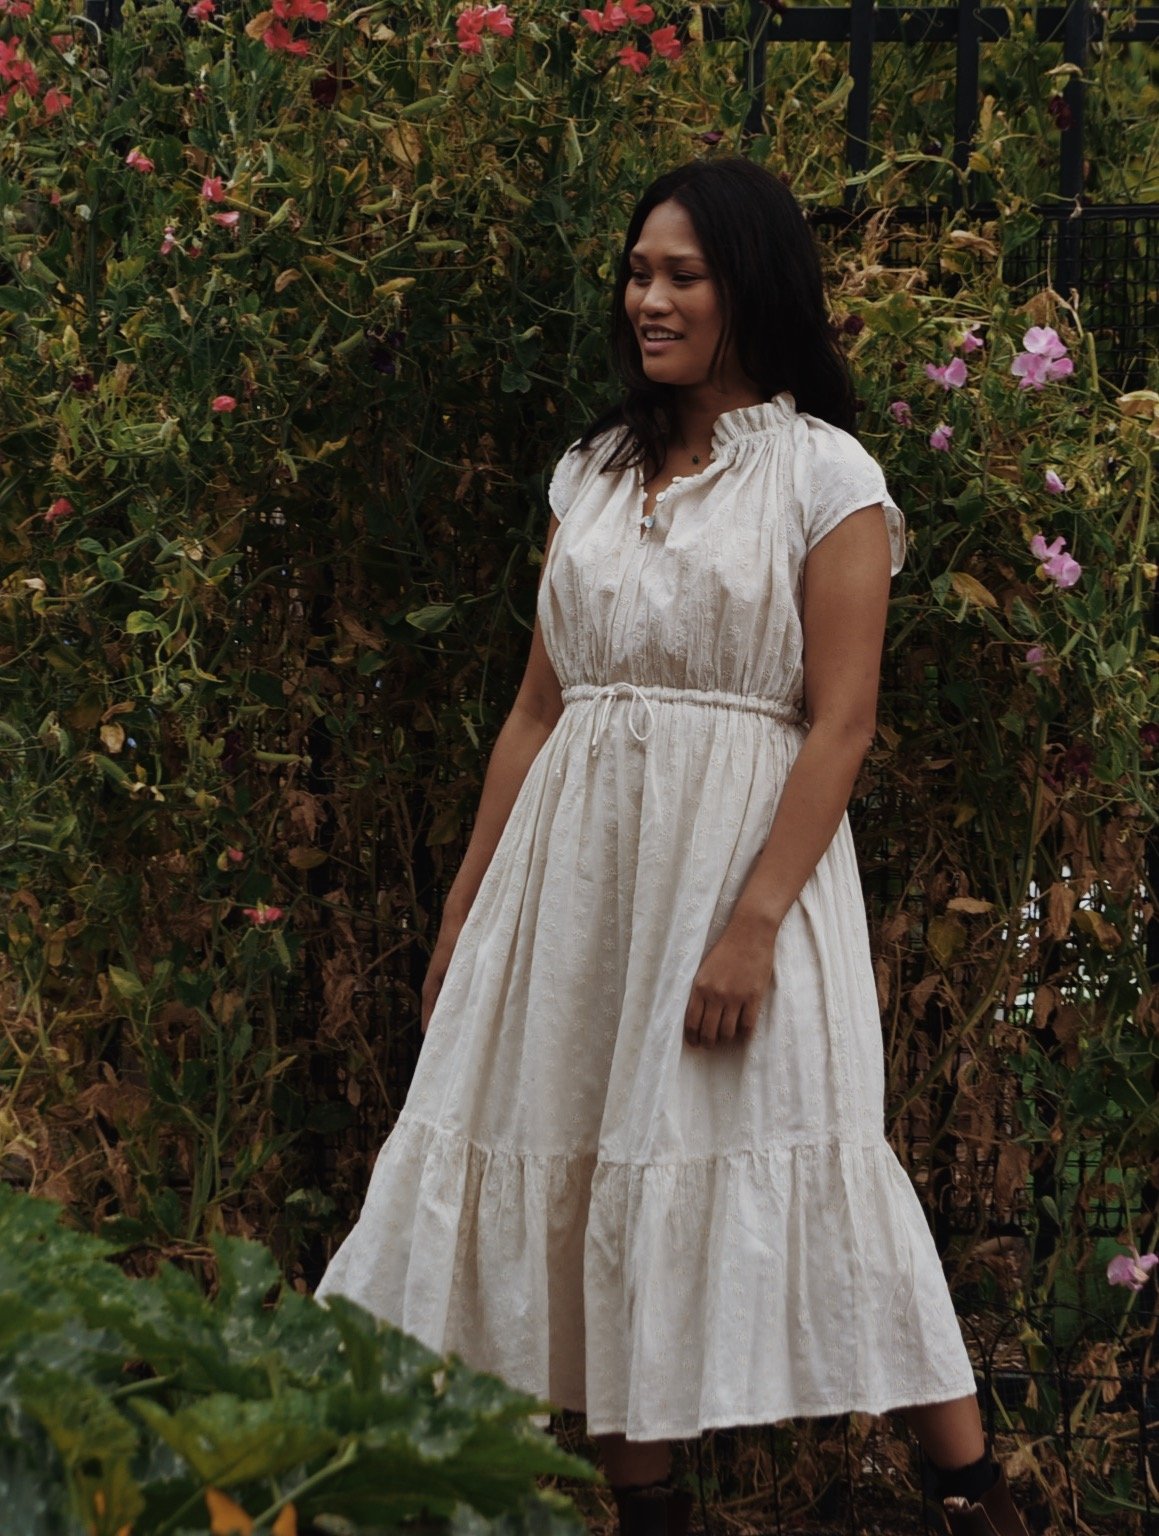 SMALL RESTOCK - 100% RECYCLED COTTON - ISABEL DRESS ANTIQUE WHITE COTTON LACE